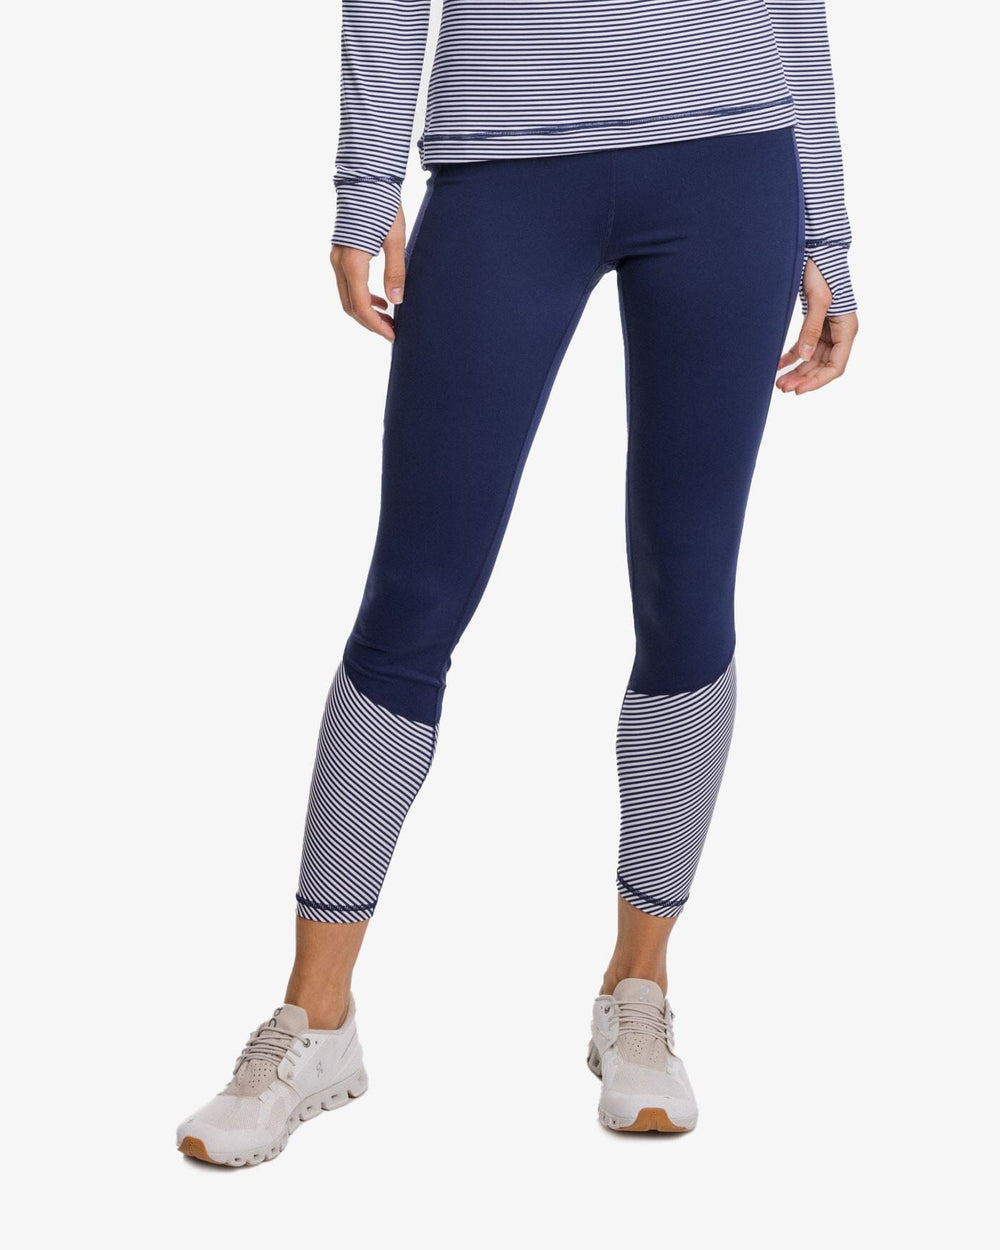 The front Studio view of the Southern Tide Lexi Colorblock High Waisted Legging by Southern Tide - Nautical Navy